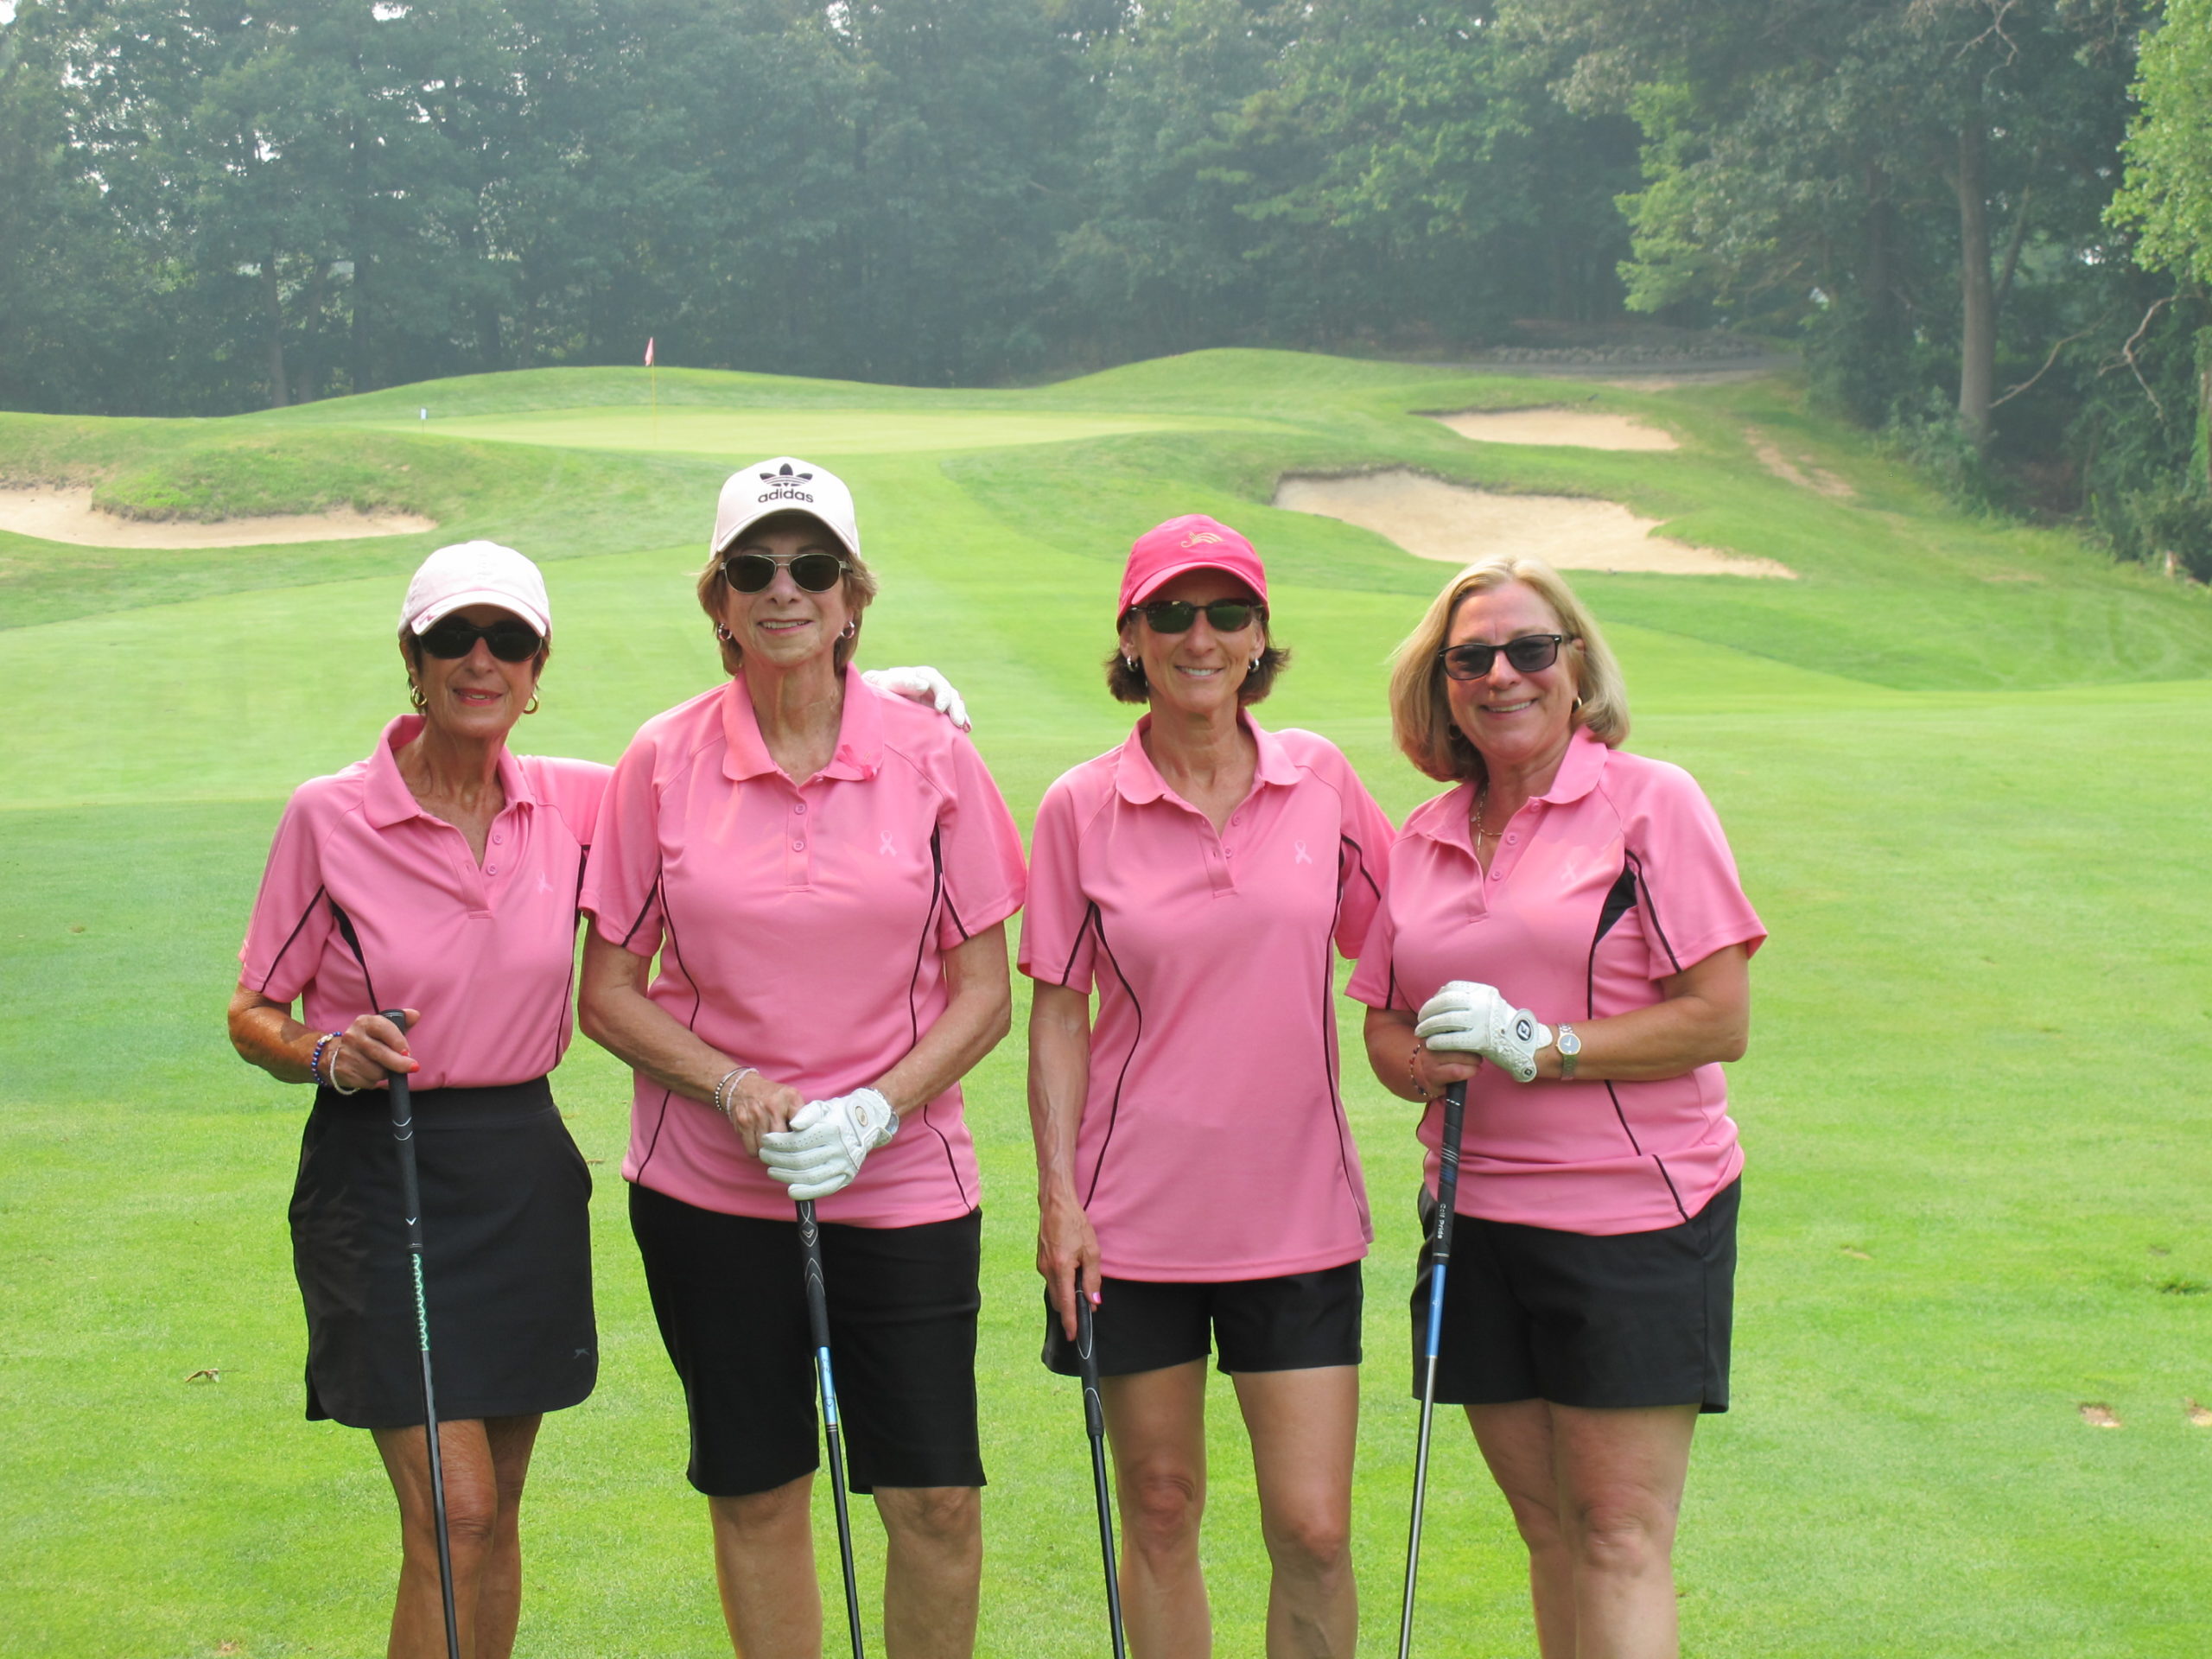 Ladies Play for P.I.N.K. Golf Tournament